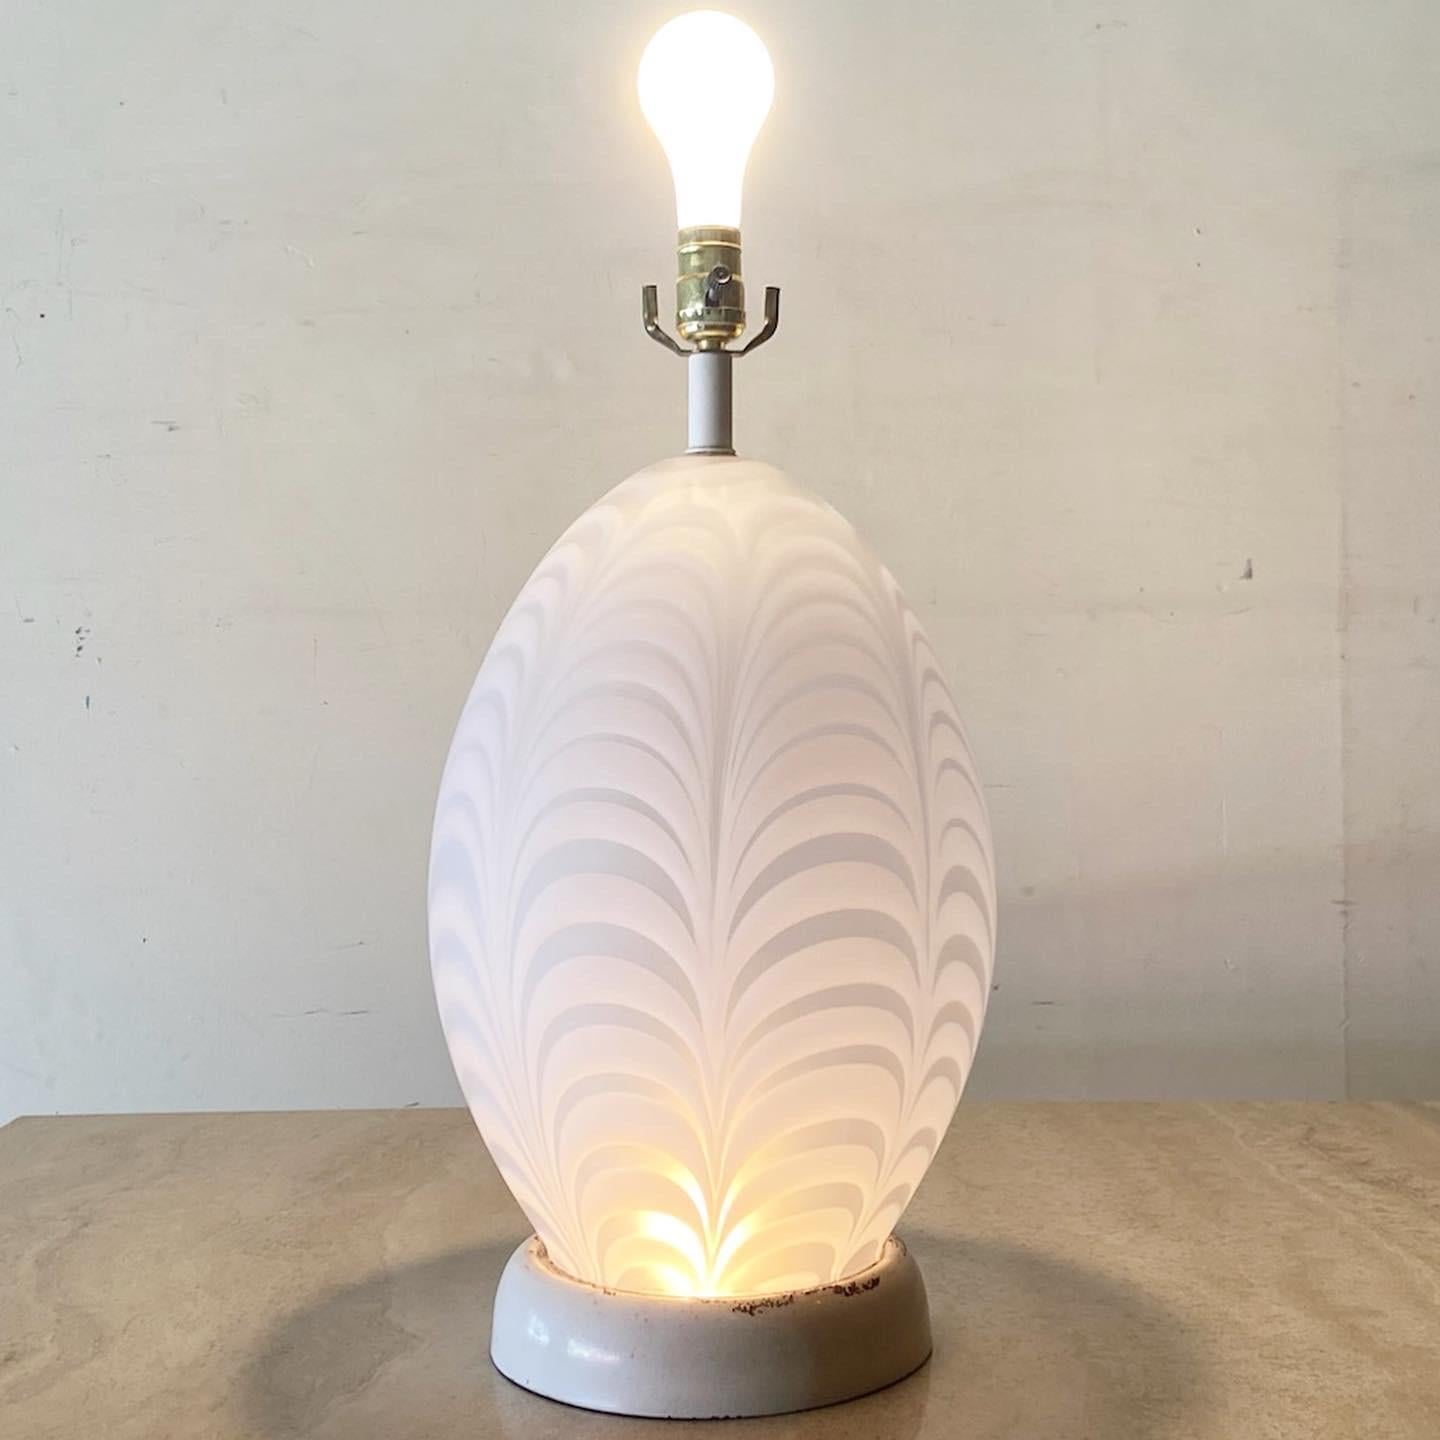 Incredible Murano style glass table lamp. Body of lamp is a glass egg shape with a light inside the body as well. less

